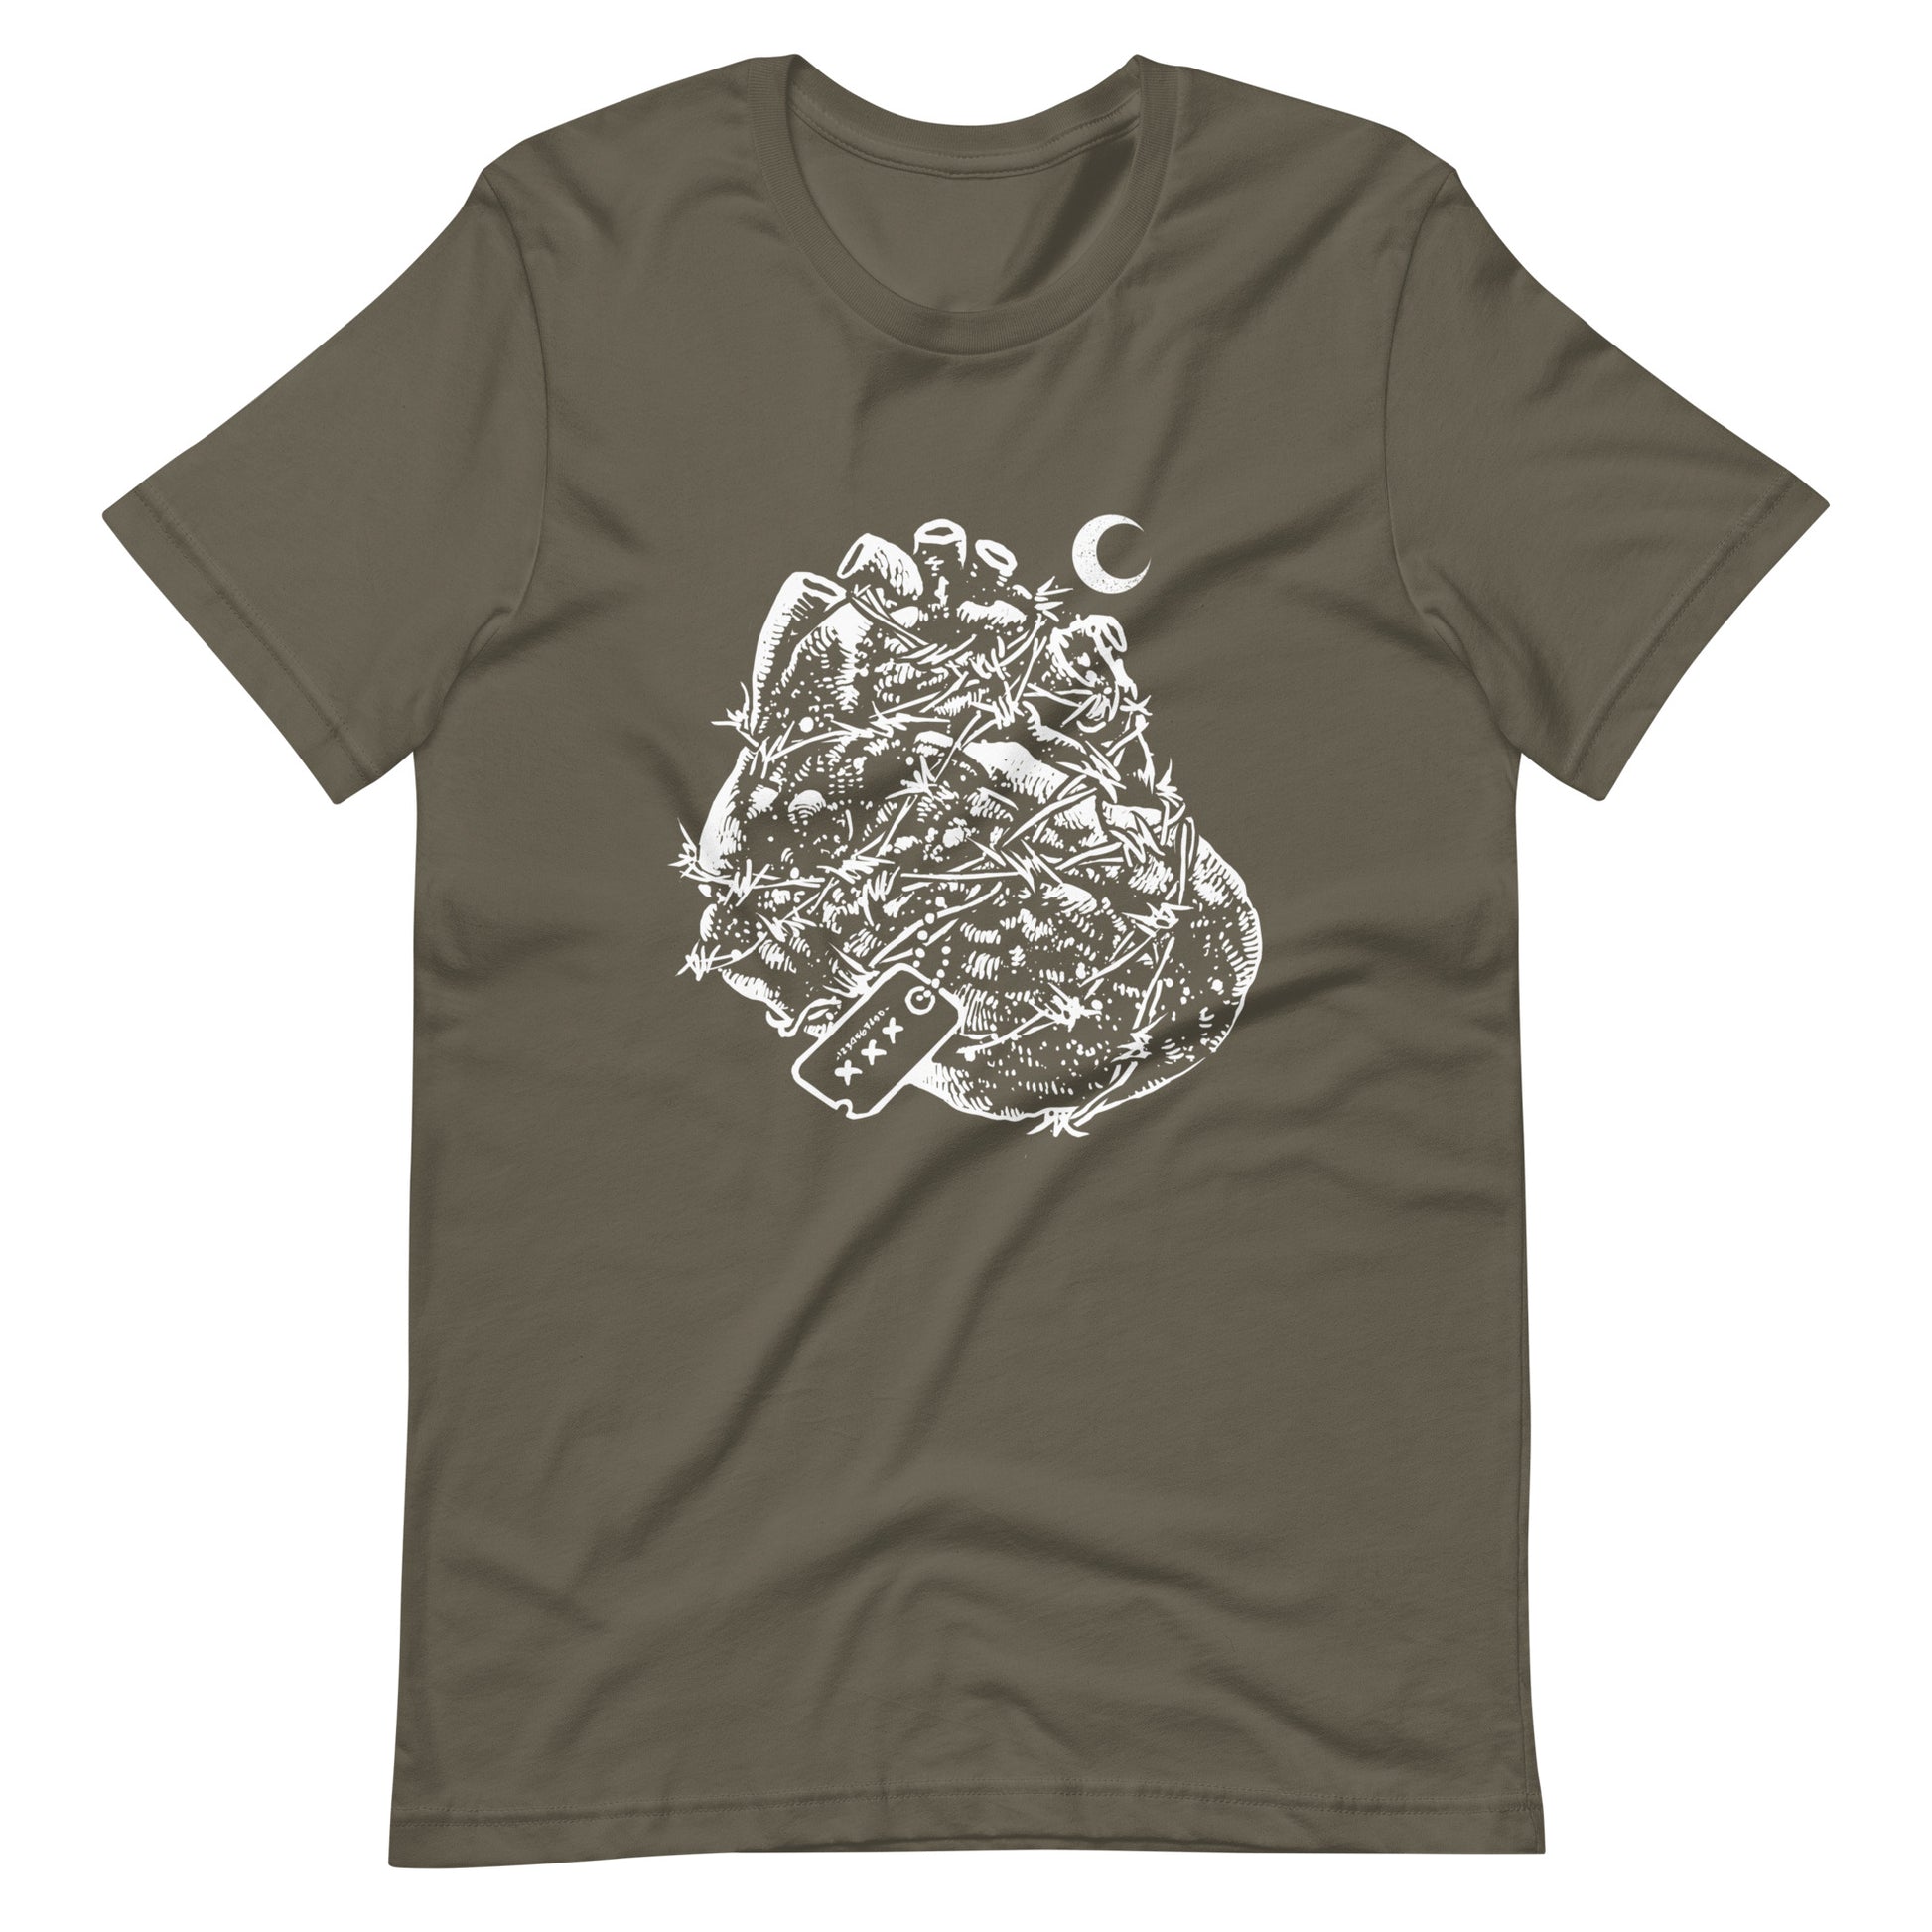 Heart Heroes - Men's t-shirt - Army Front